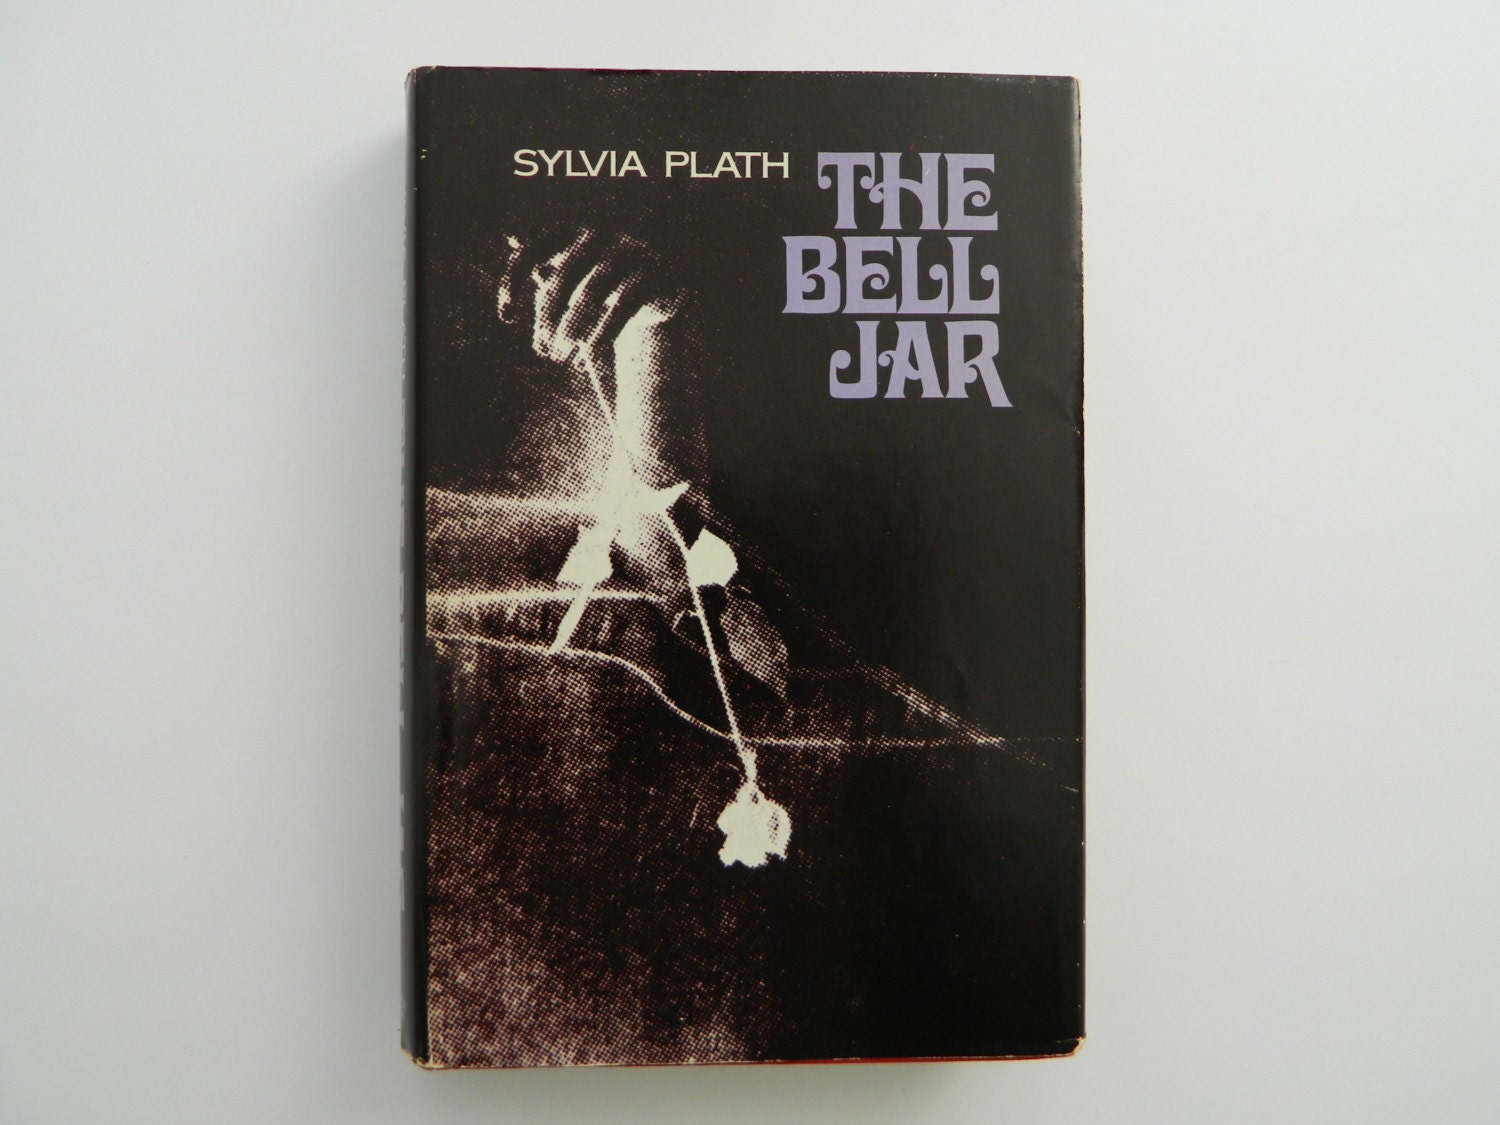 6. "The Bell Jar" by Sylvia Plath - wide 8